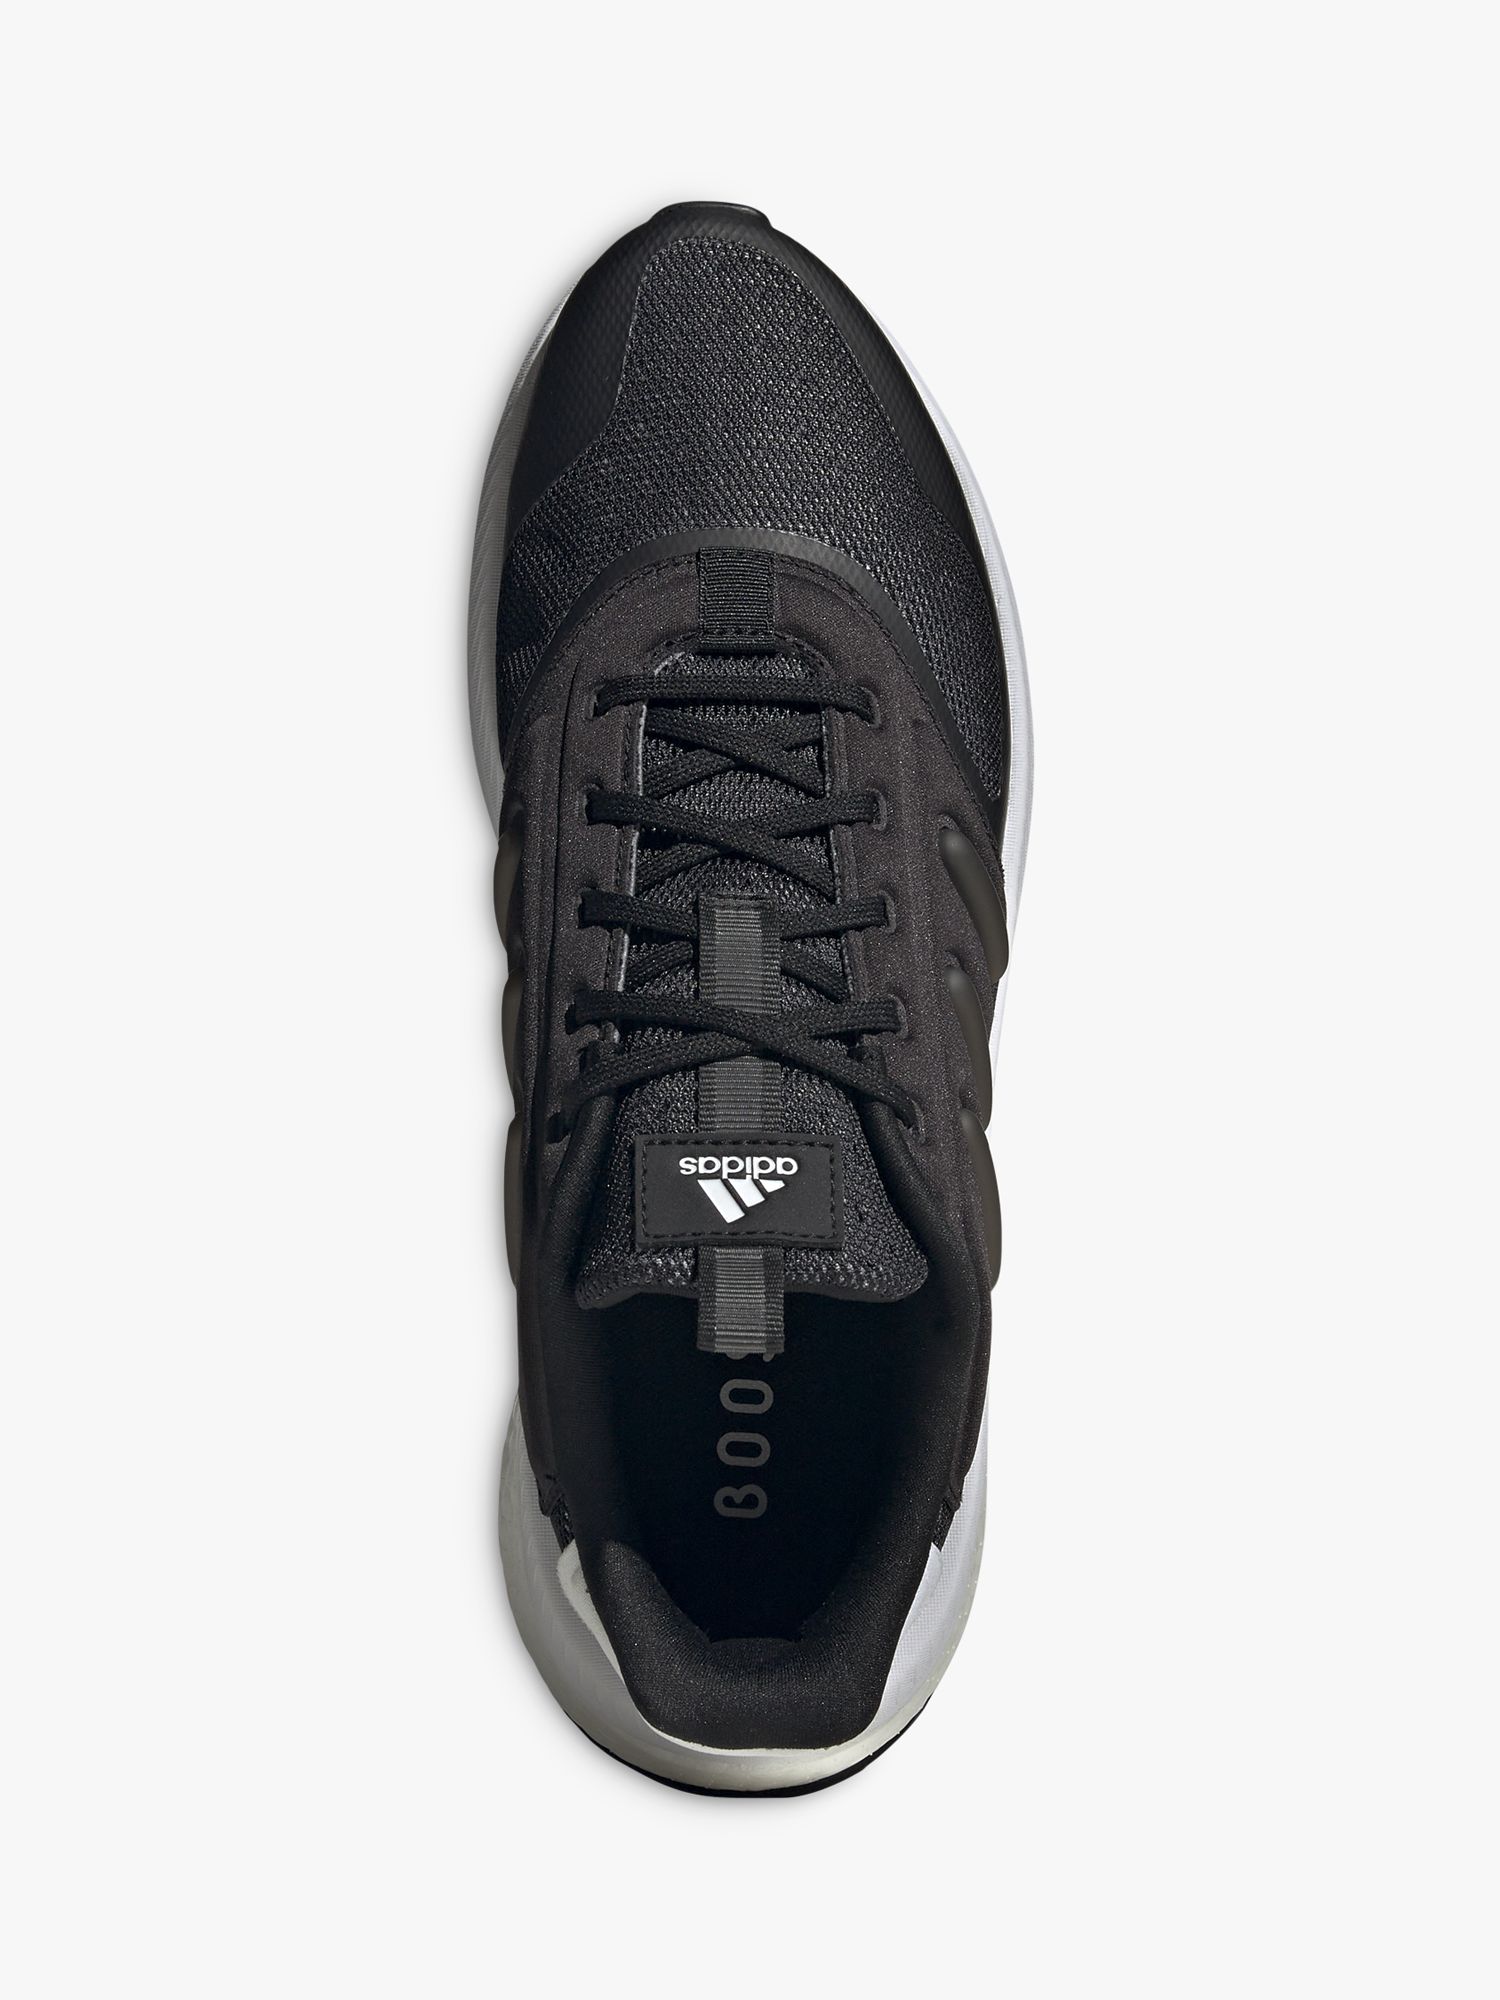 adidas X_PLRPHASE Trainers, Black at John Lewis & Partners